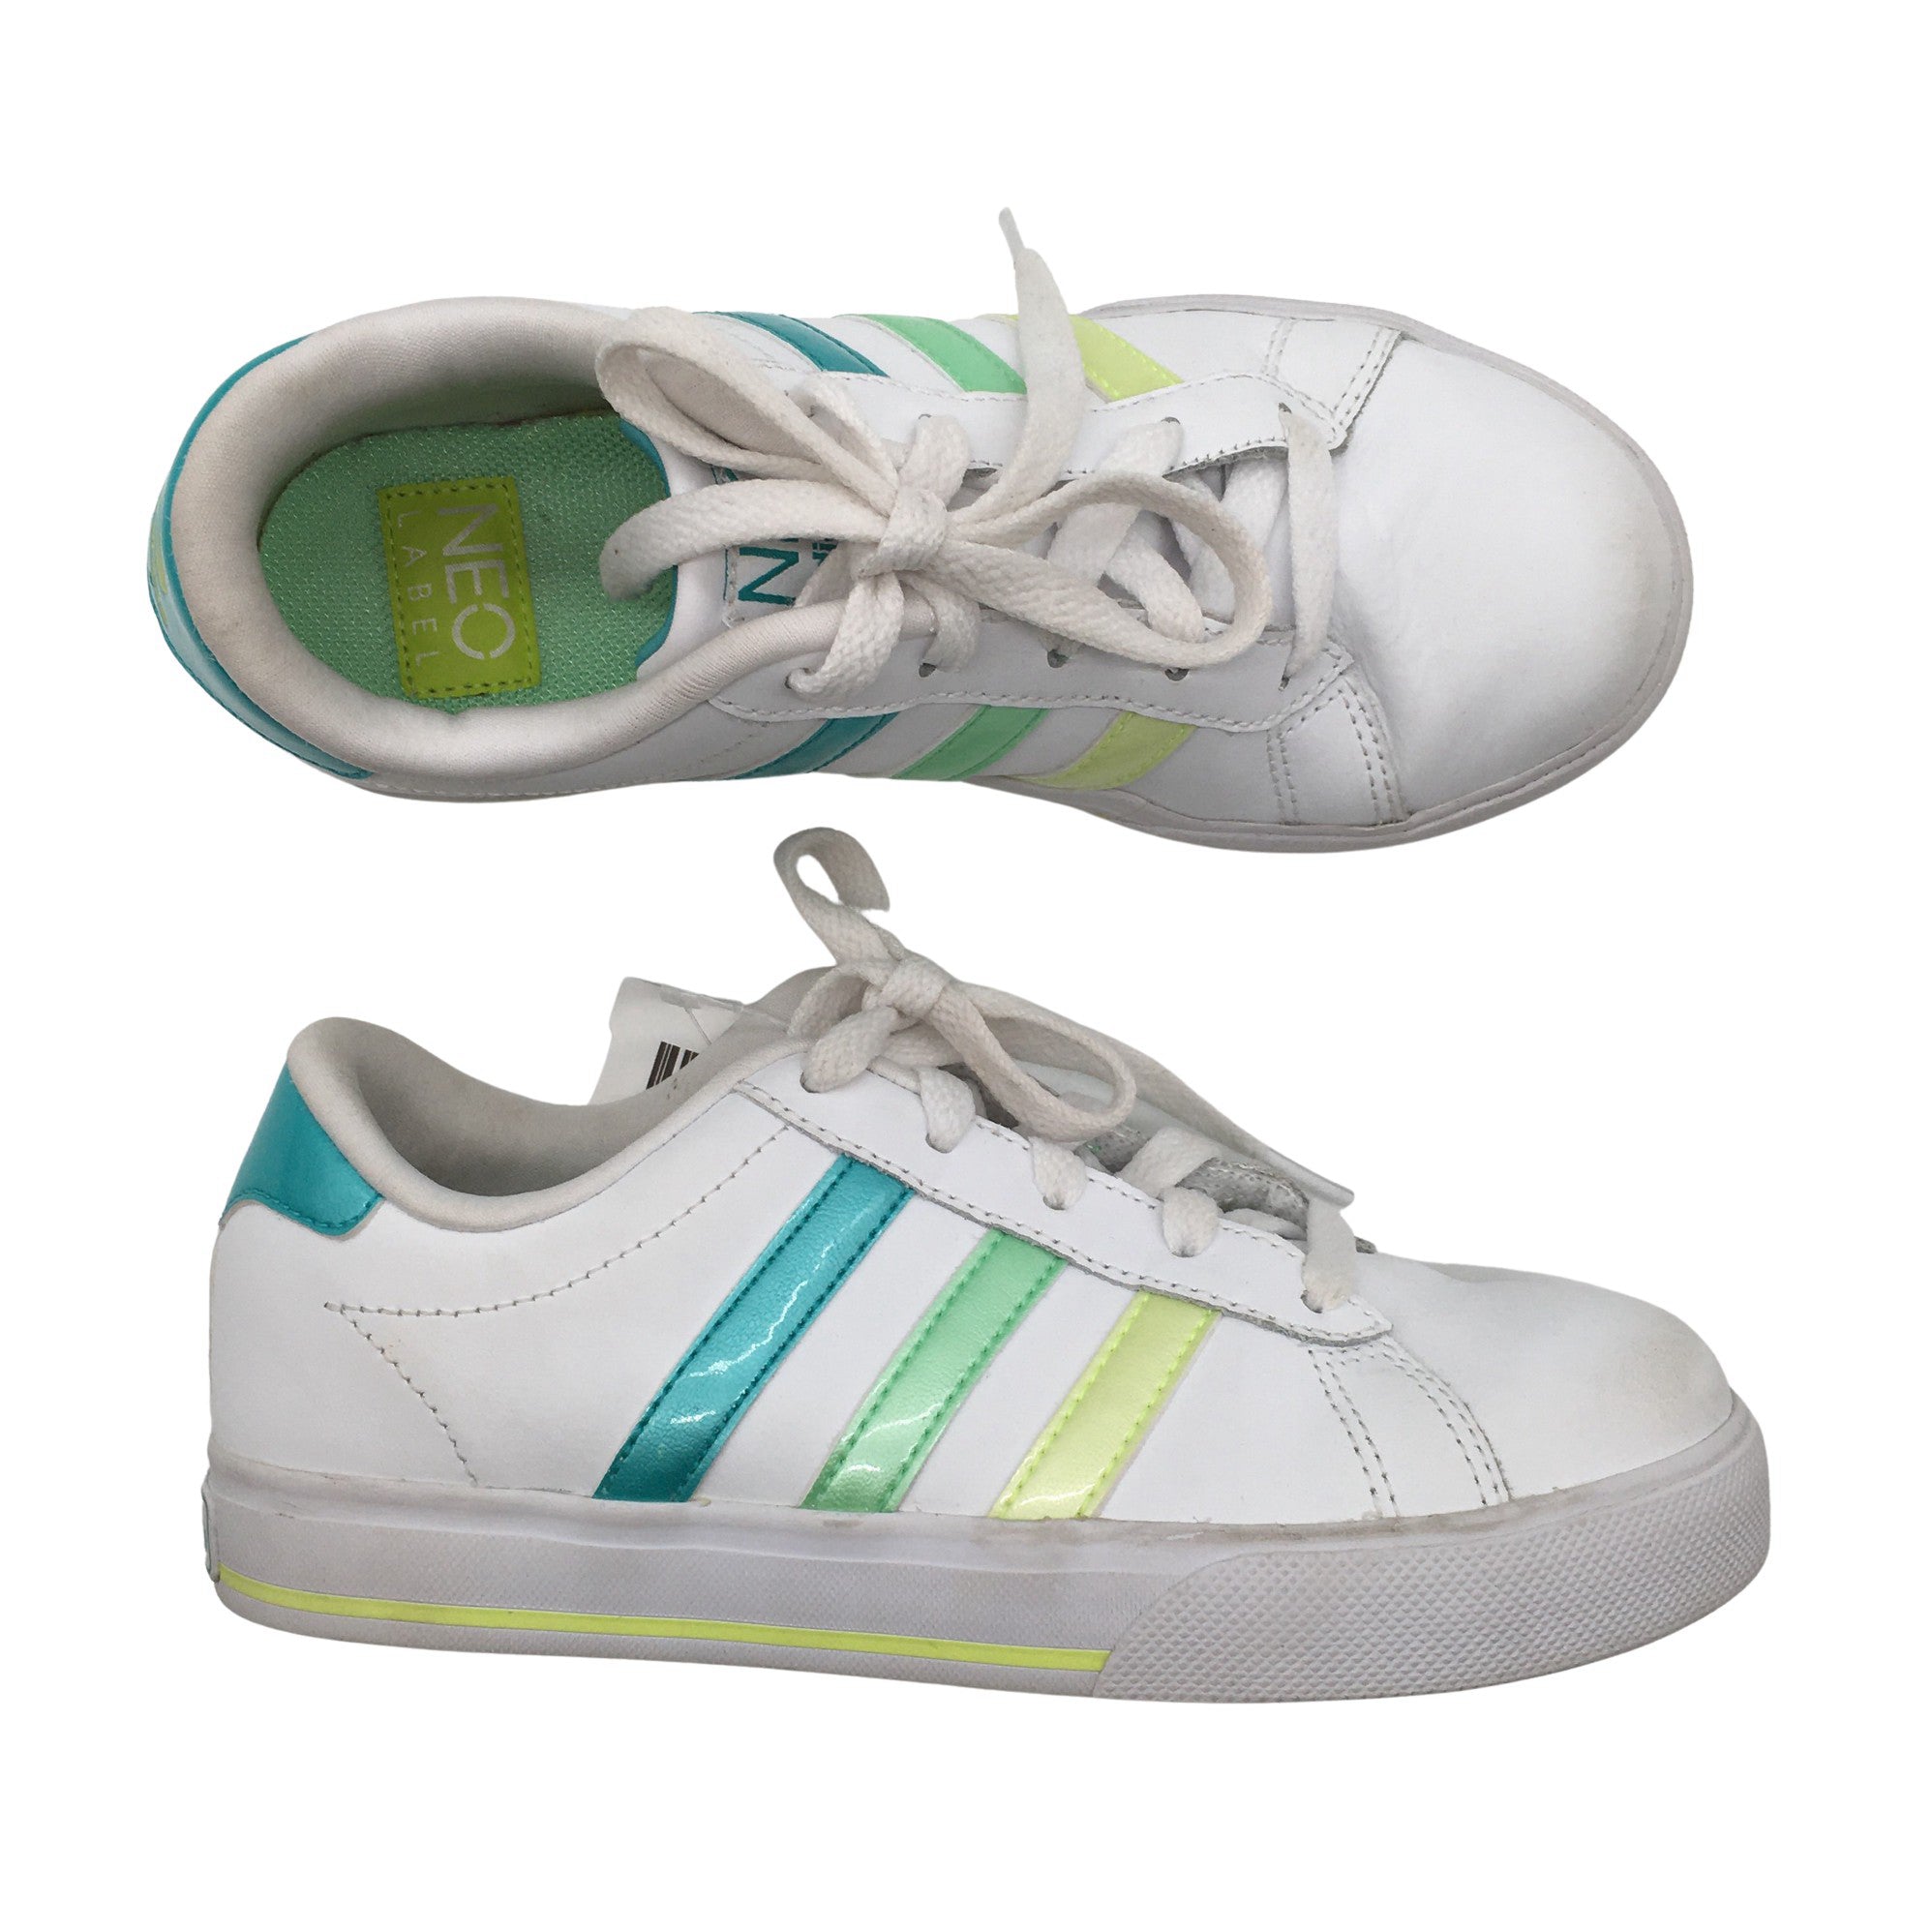 Ligero Fortalecer caos Unisex Adidas Casual sneakers, size 34 (White) | Emmy